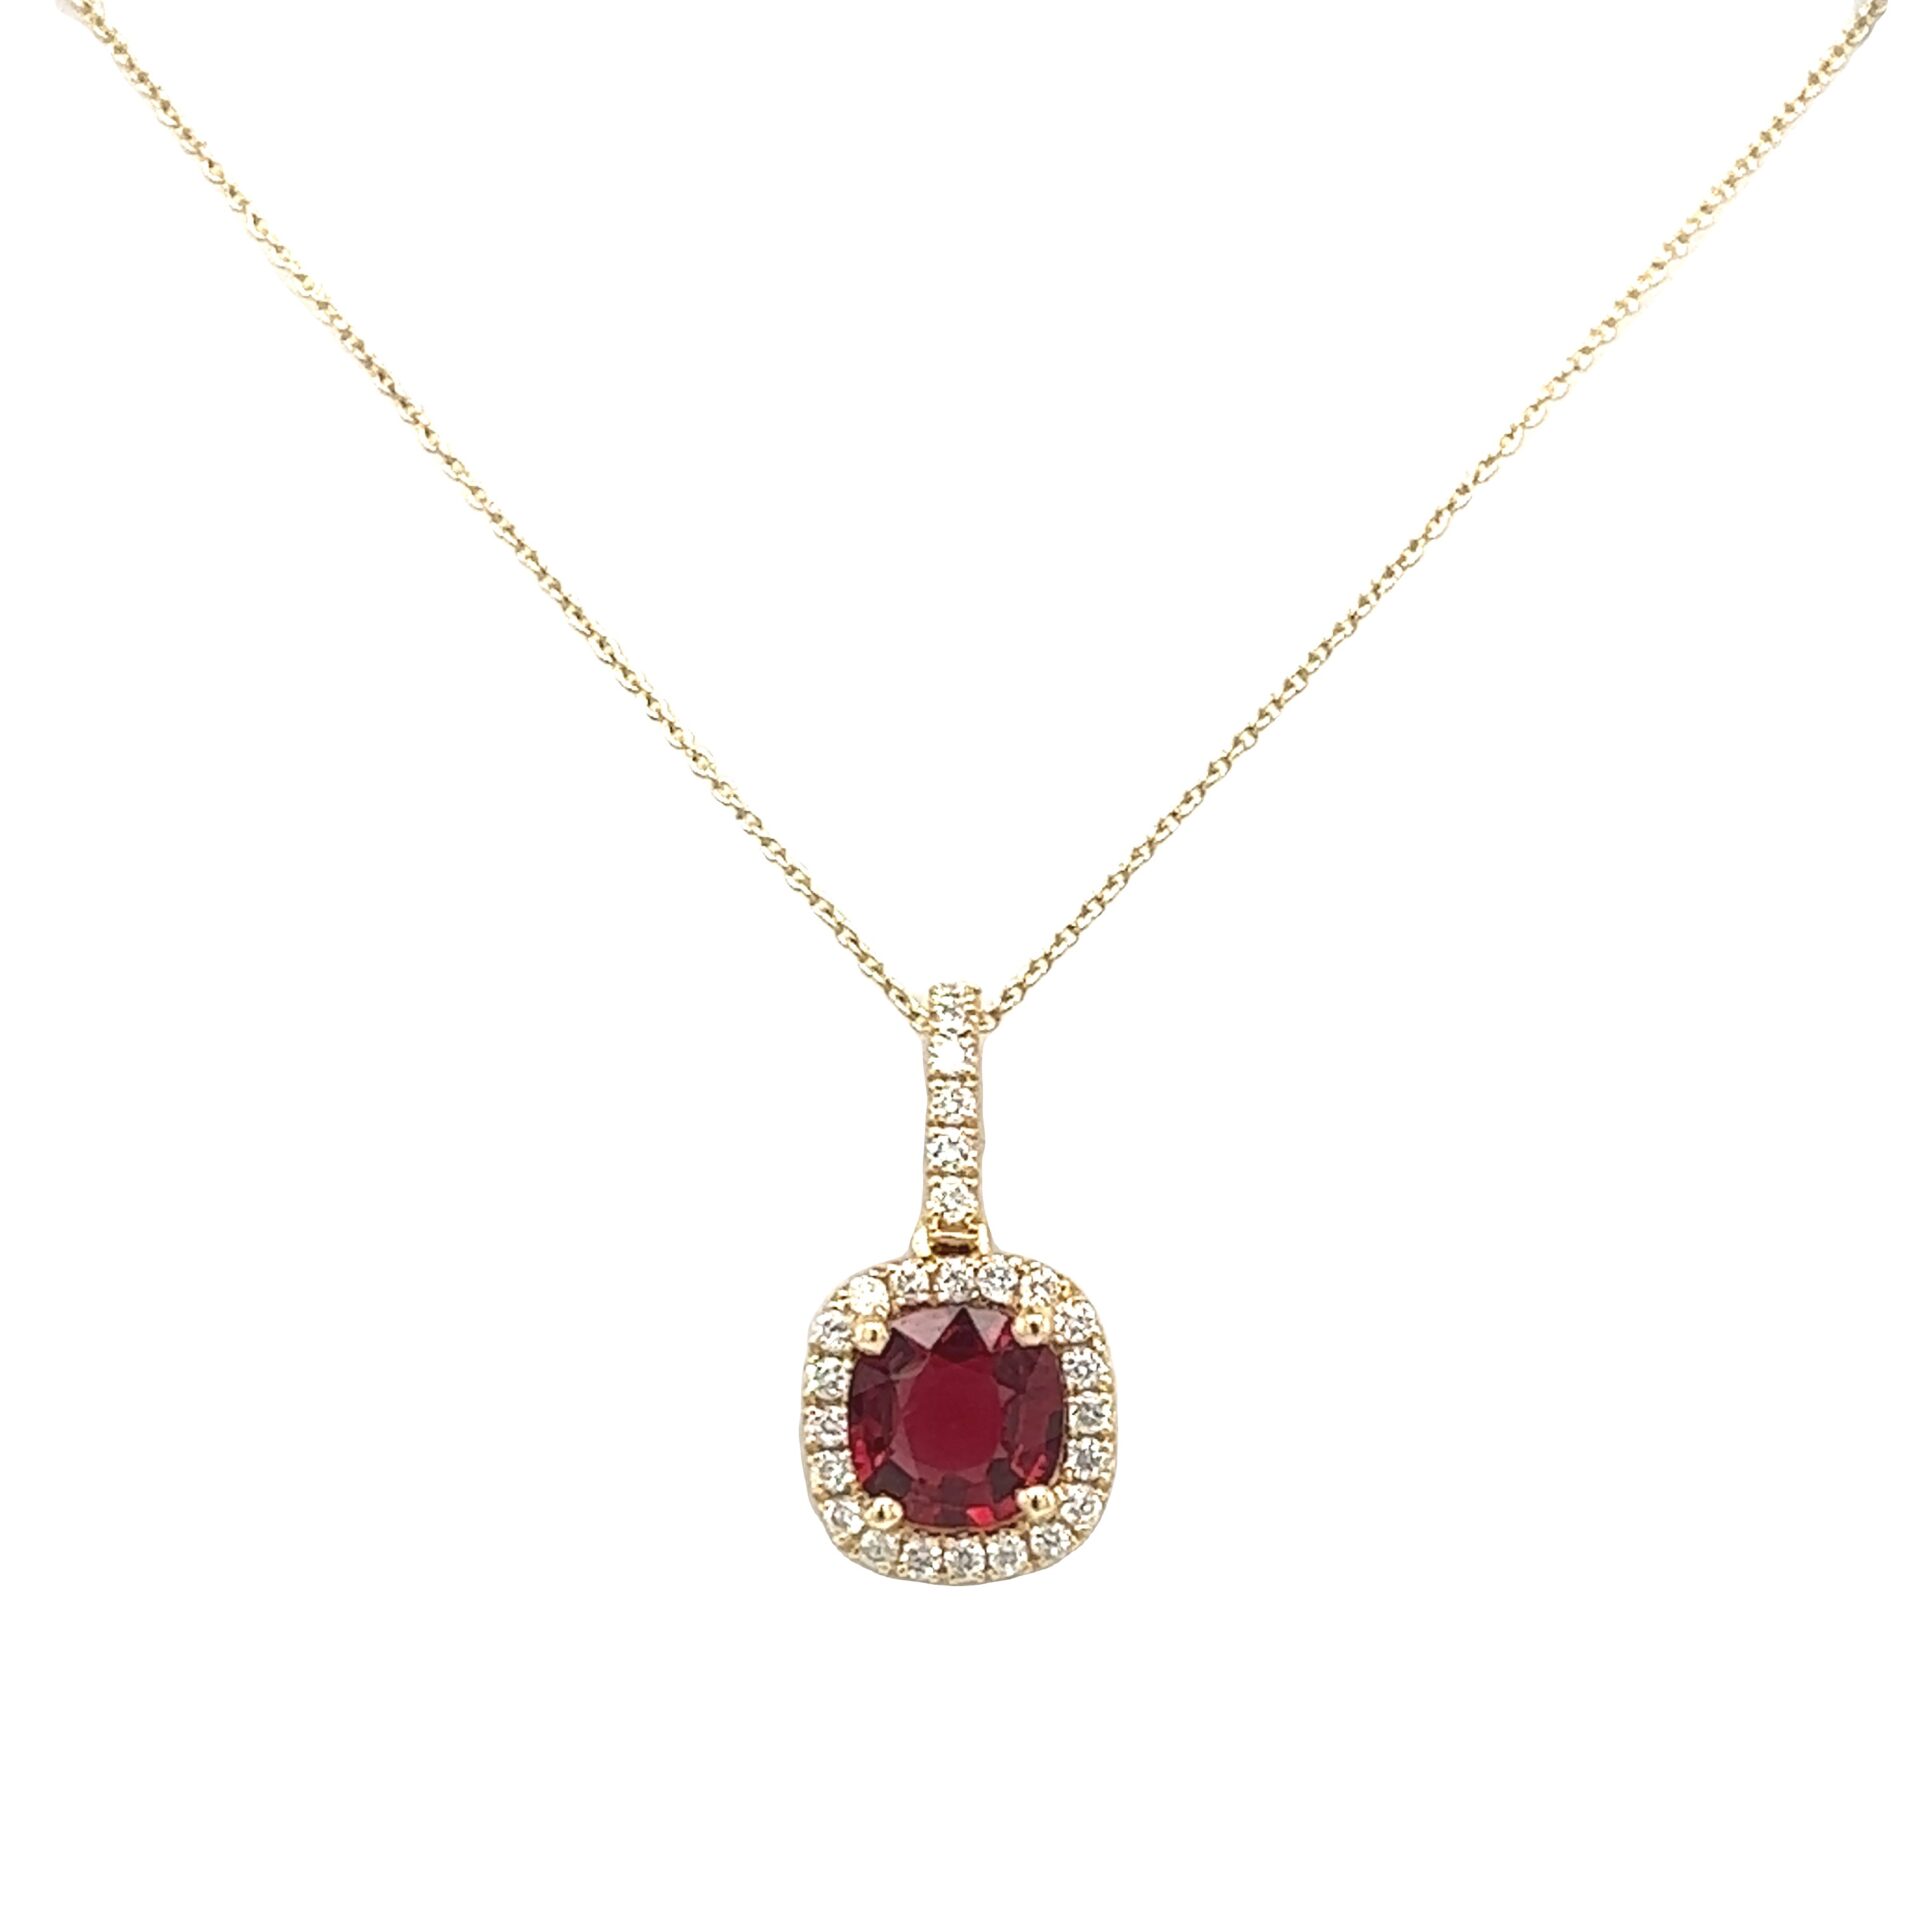 Cushion-Cut Spinel Pendant - Vardy's Jewelers Bay Area